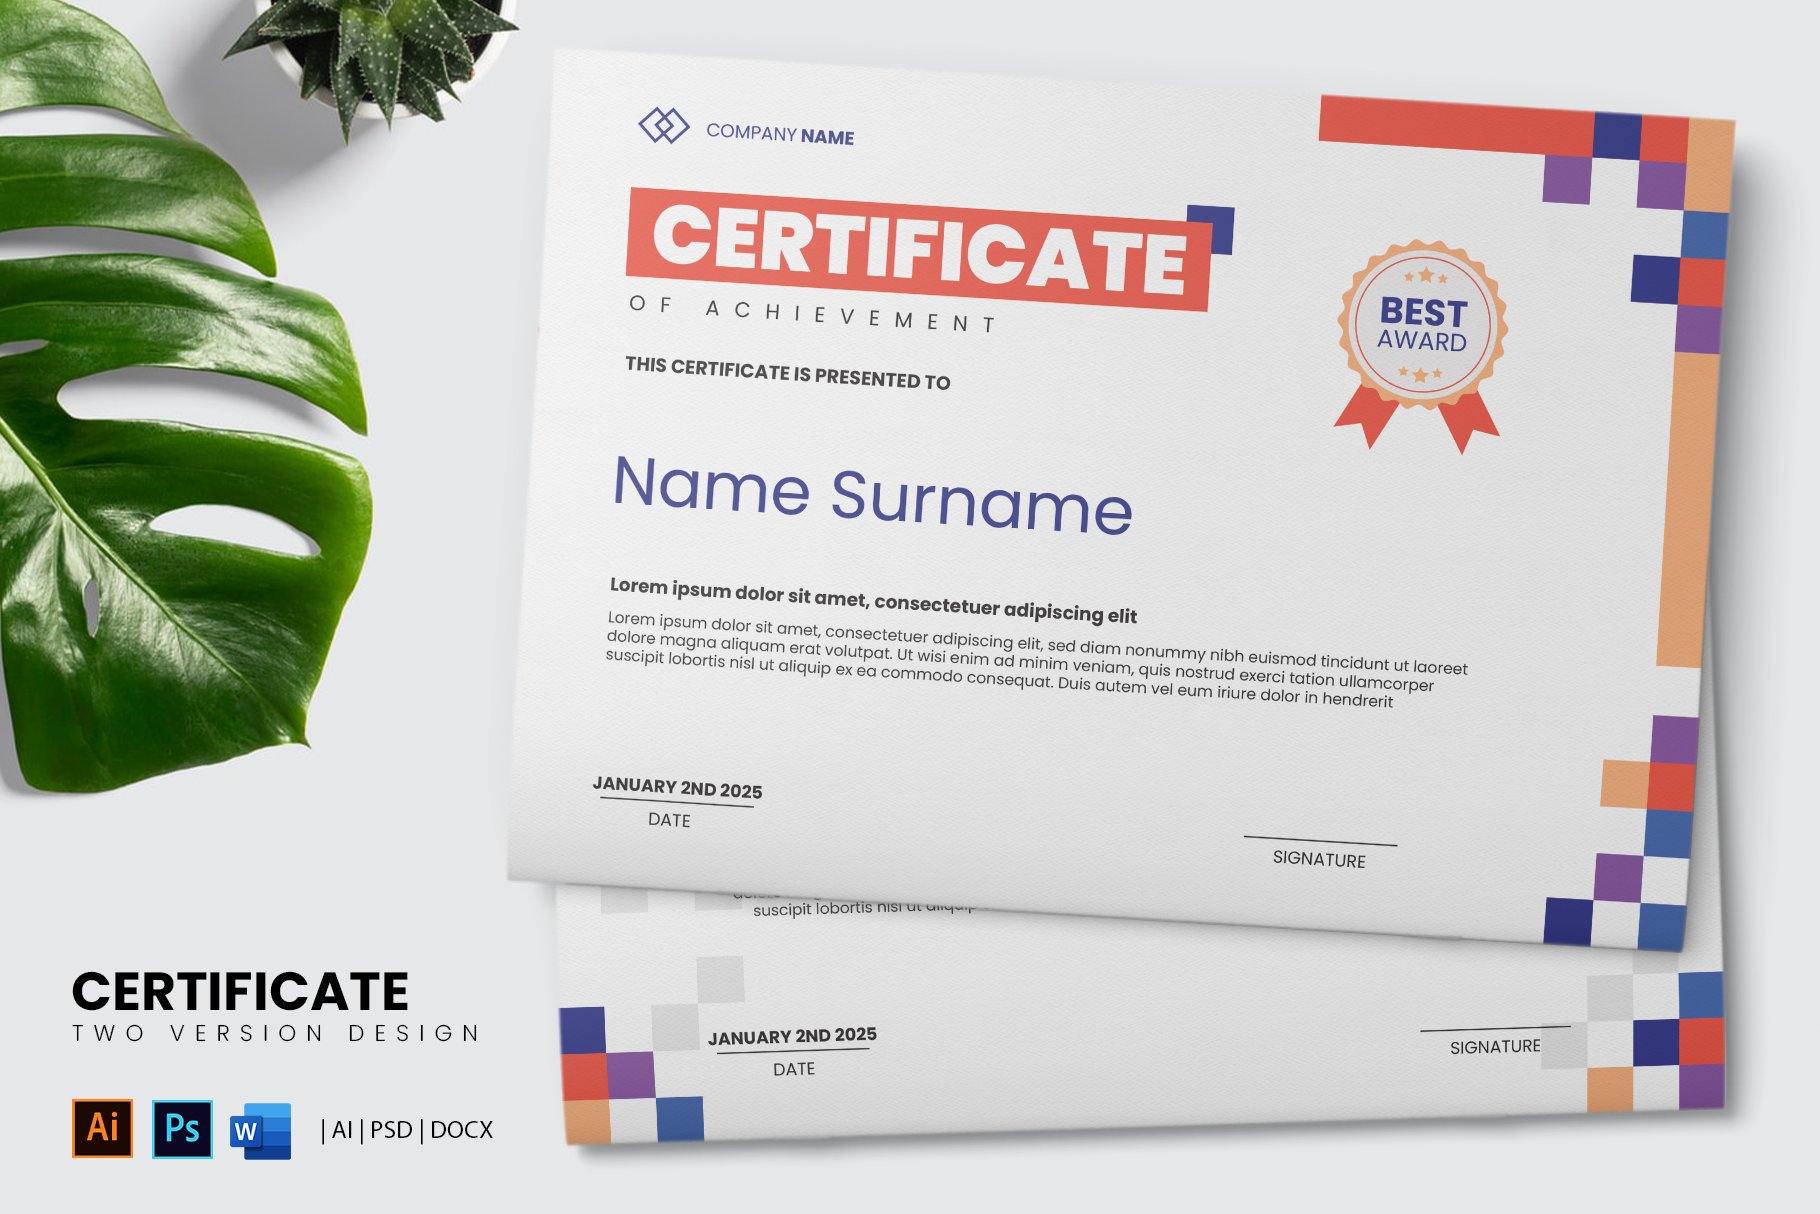 Double Version Certificate Template cover image.